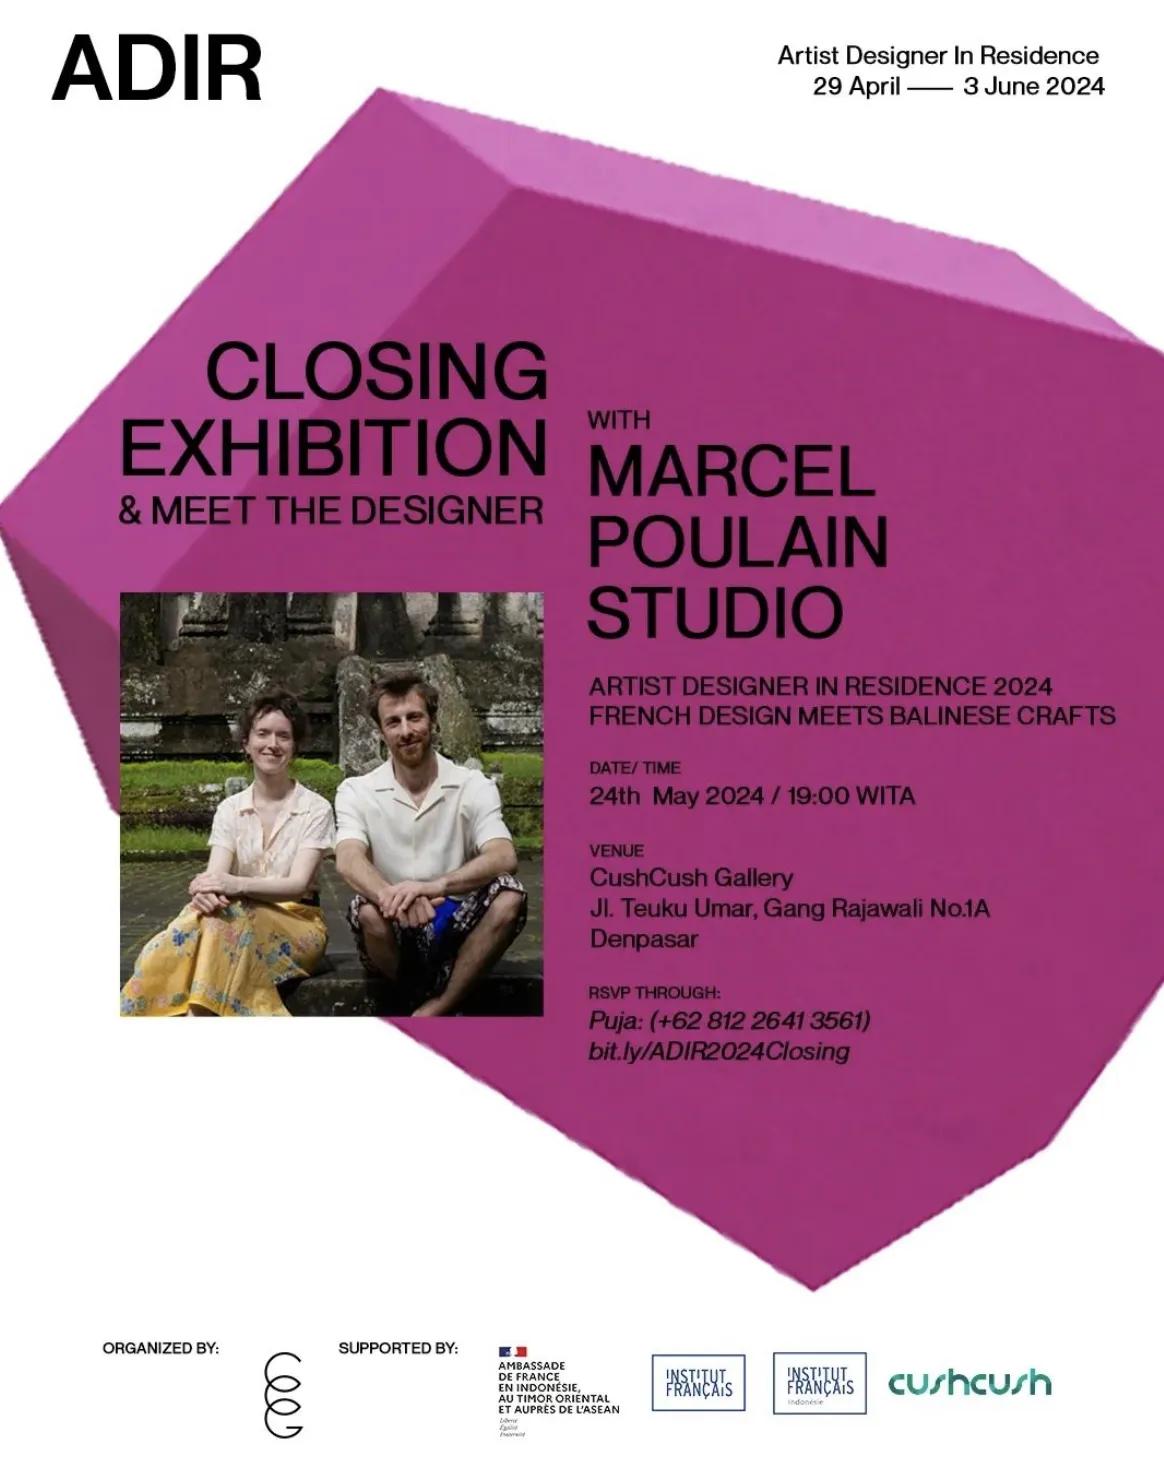 Event at CushCush Gallery on May 24 2024: Closing Exhibition